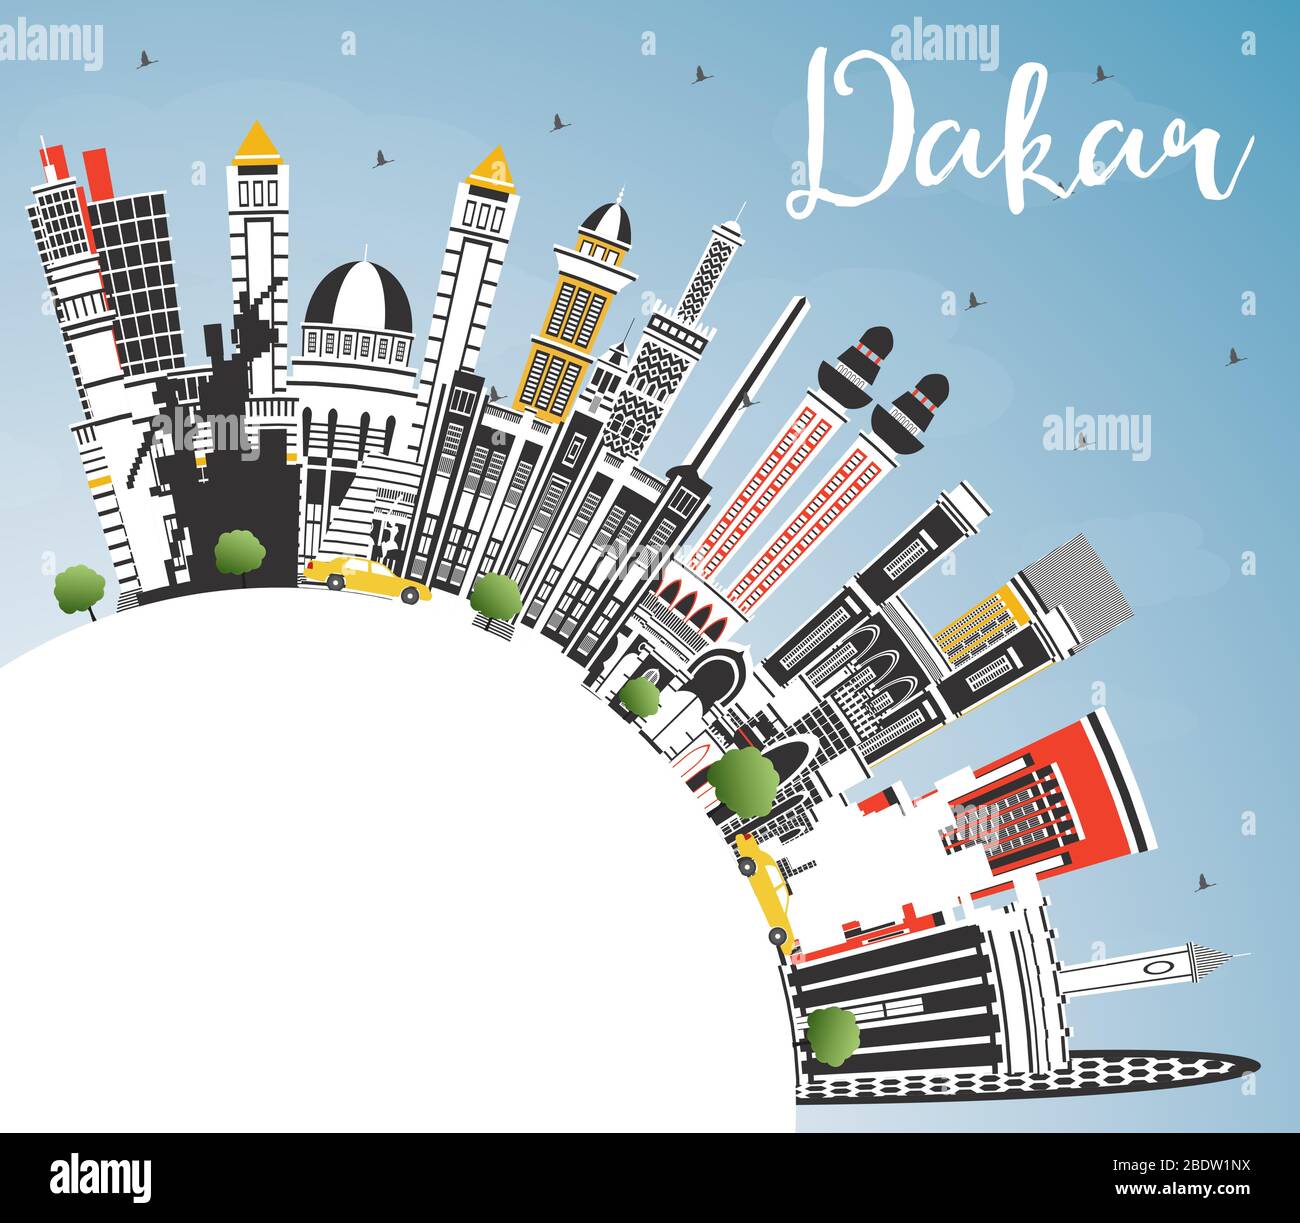 Dakar Senegal City Skyline with Color Buildings, Blue Sky and Copy Space. Vector Illustration. Business Travel and Concept with Historic Architecture. Stock Vector